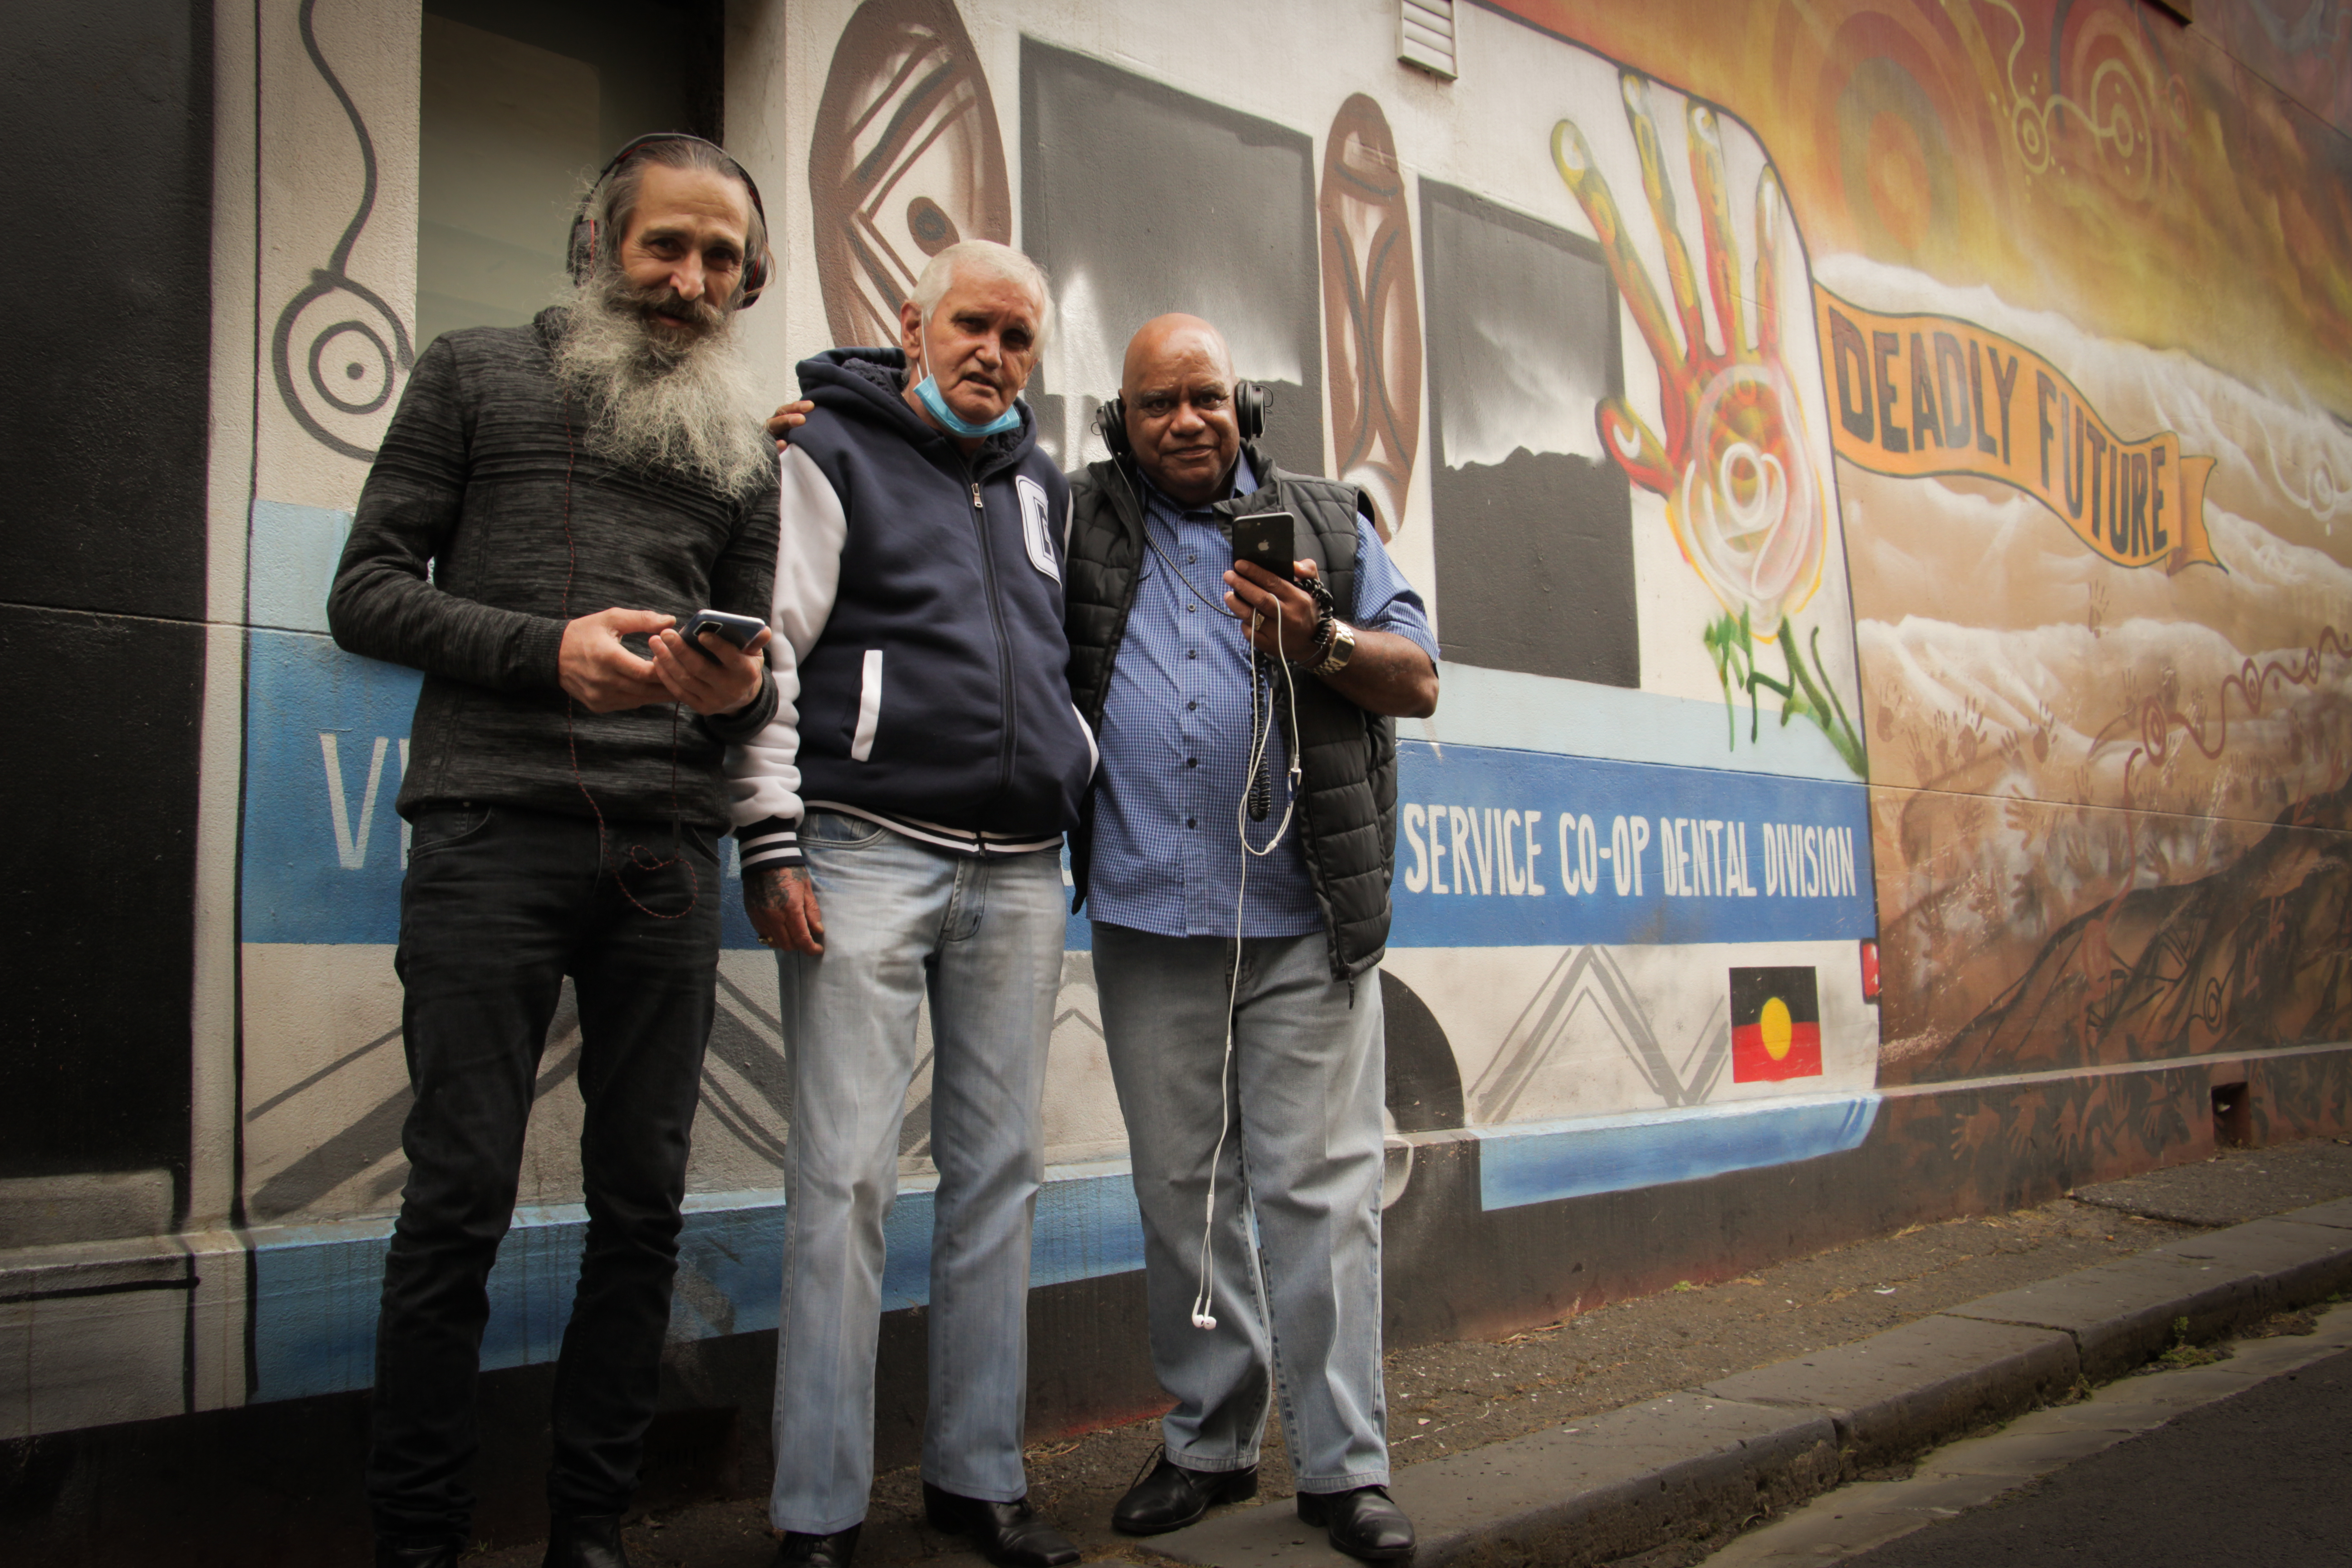 Uncle Colin Hunter, Uncle Bootsie Thorpe and elder Bobby Nicholls standing next to a mural that reads 'Deadly Future'. They are smiling, wearing headphones and holding their phones.